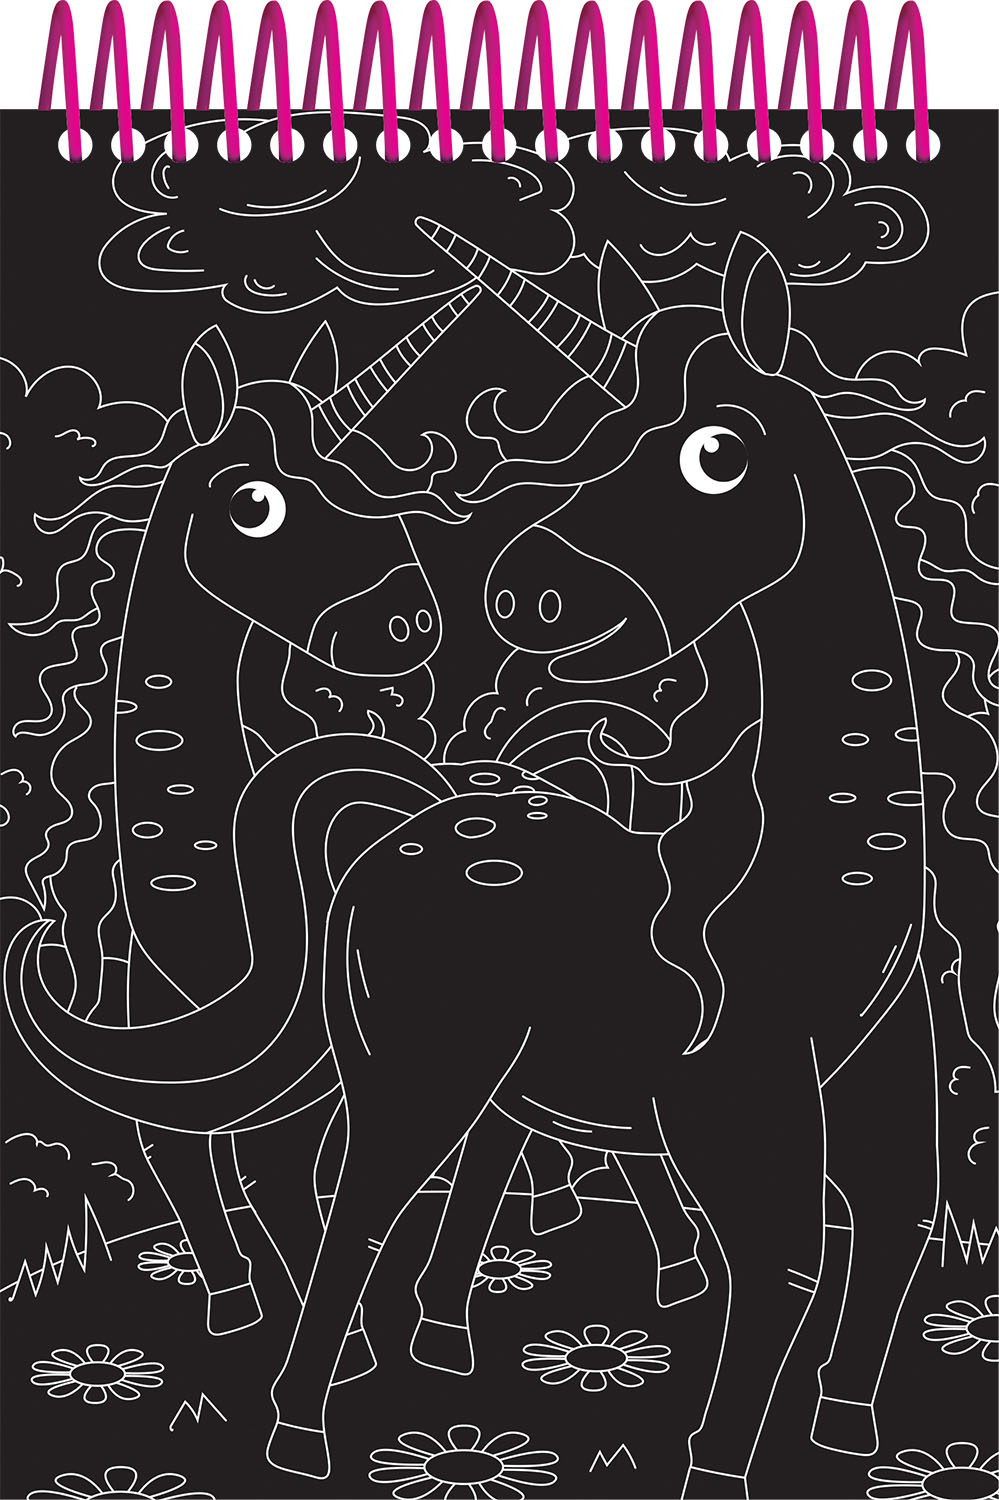 Scratch Coloring Book For Kids Unicorns, Toys \ Creative toys